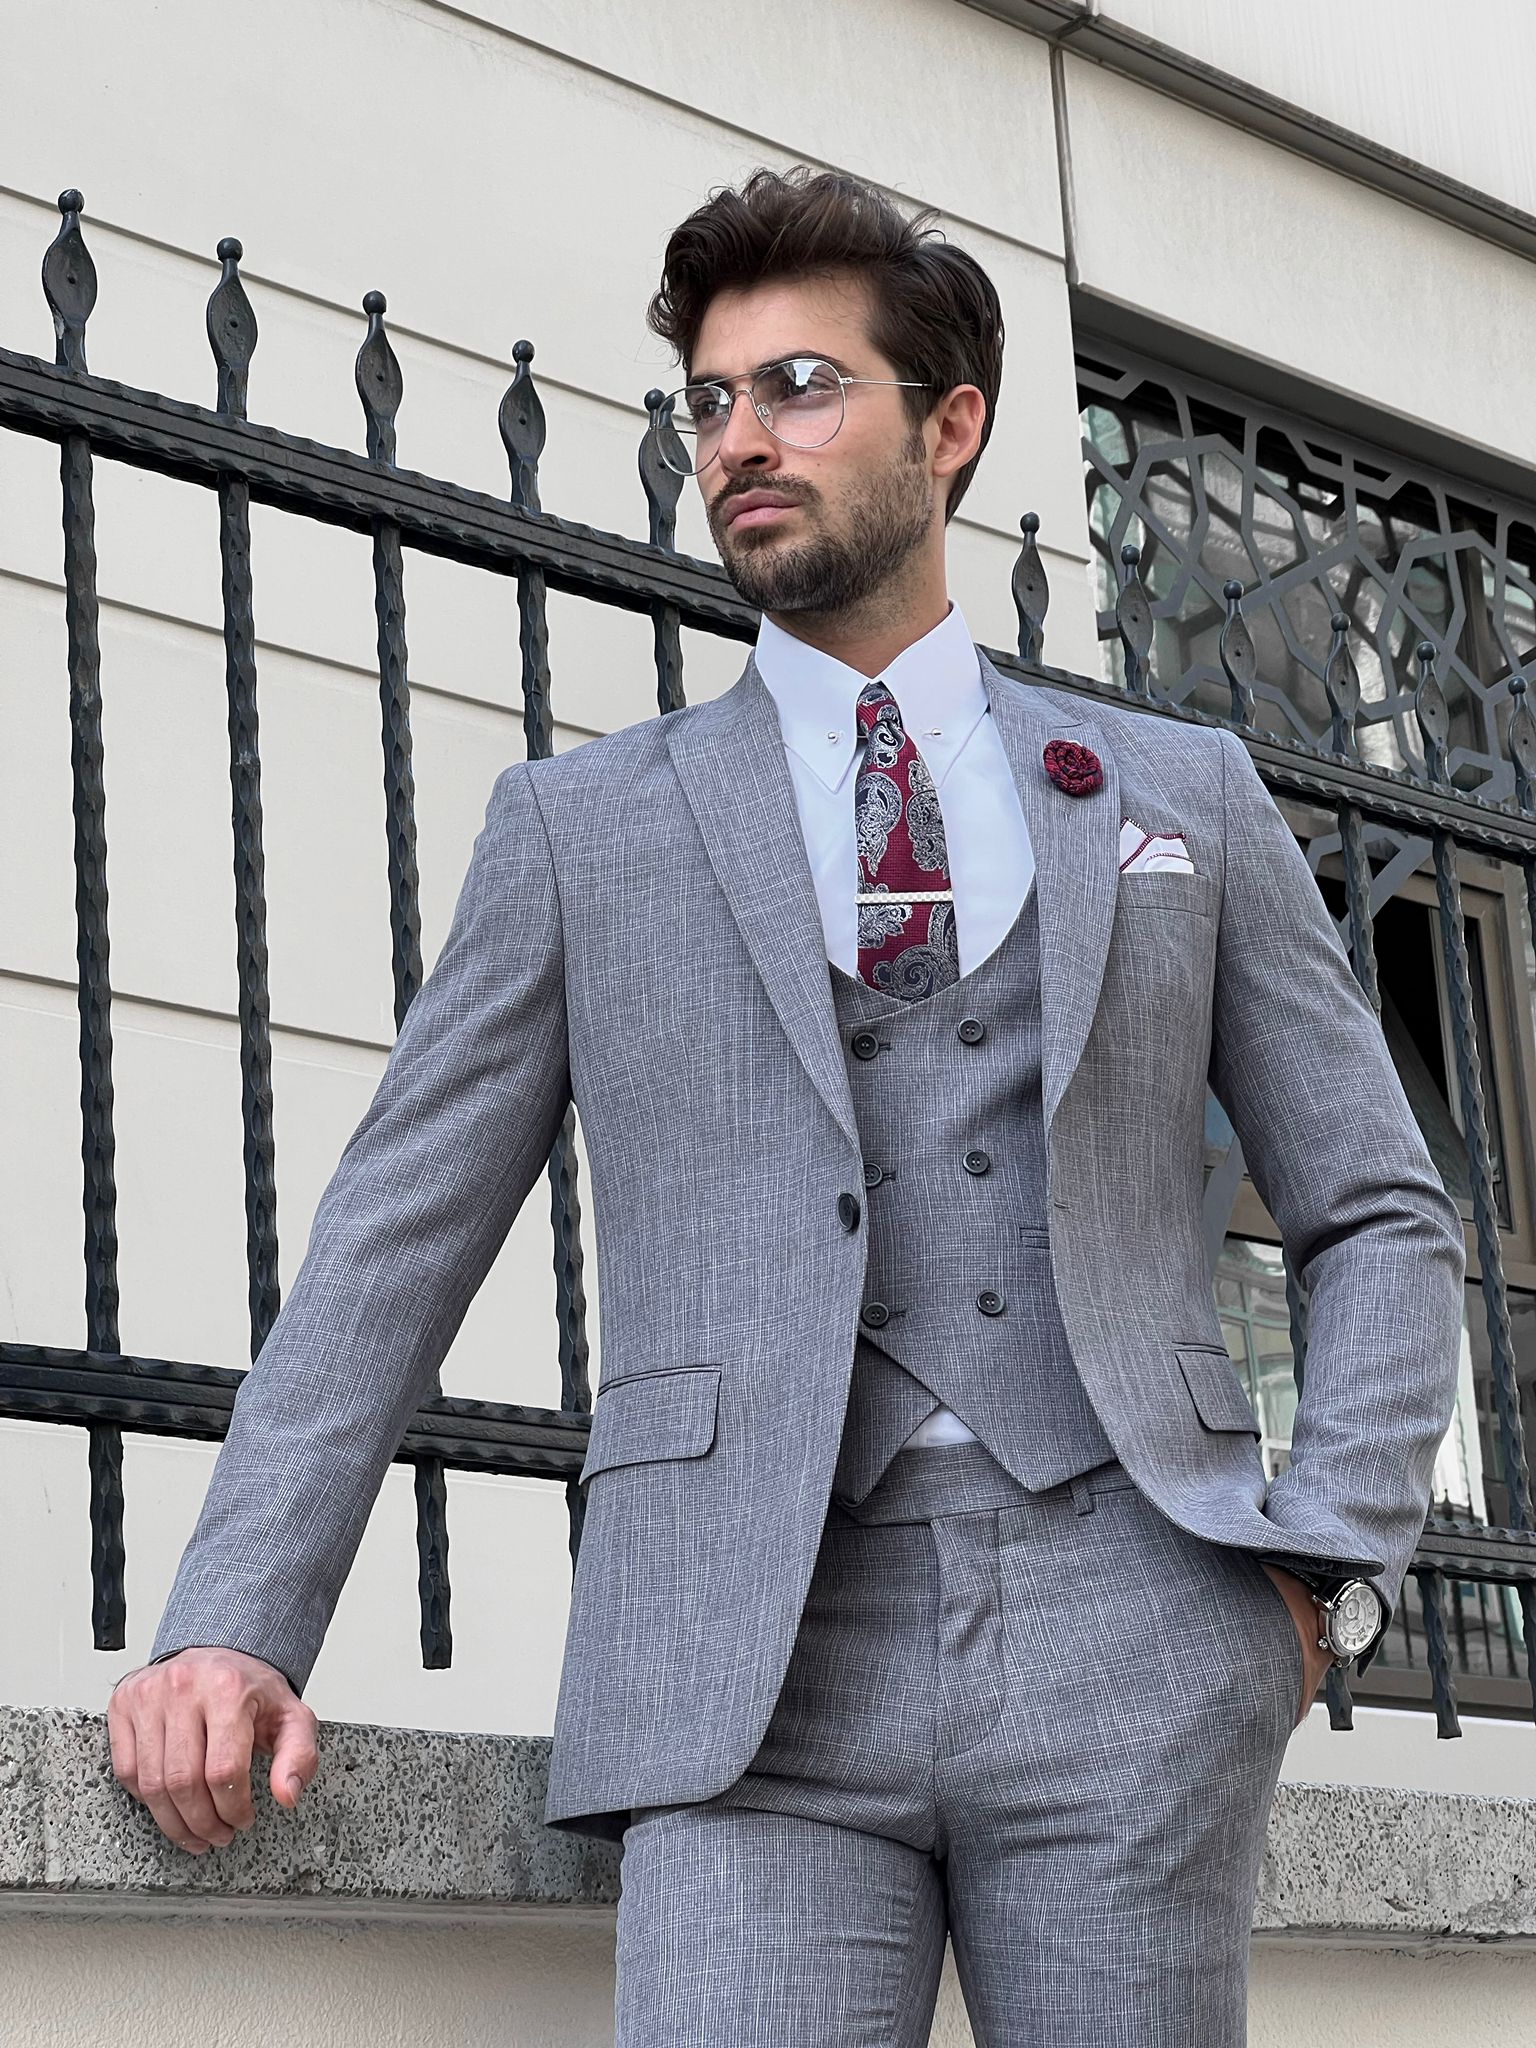 Bojoni Astoria Slim Fit Patterned Pointed Collared Gray Suit